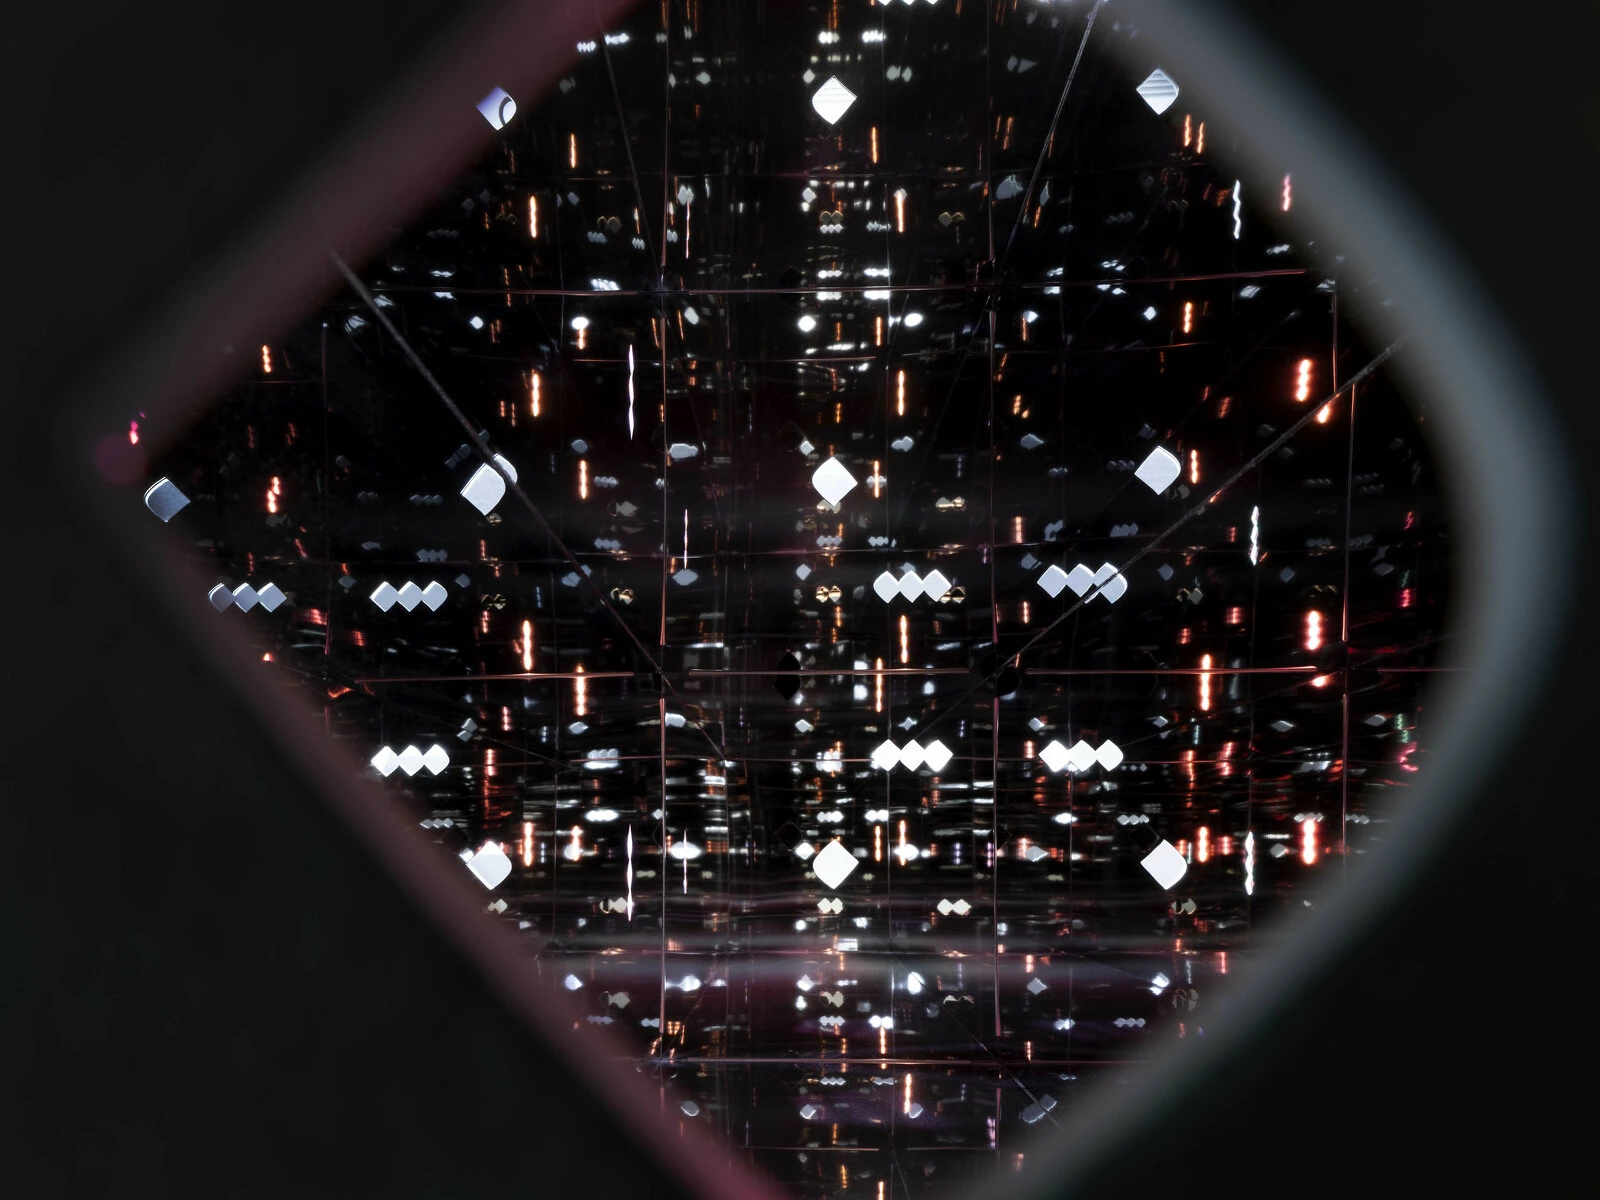 View through a diamond shape, a noghte, reveals millions of light refractions in the shape of more noghtes.